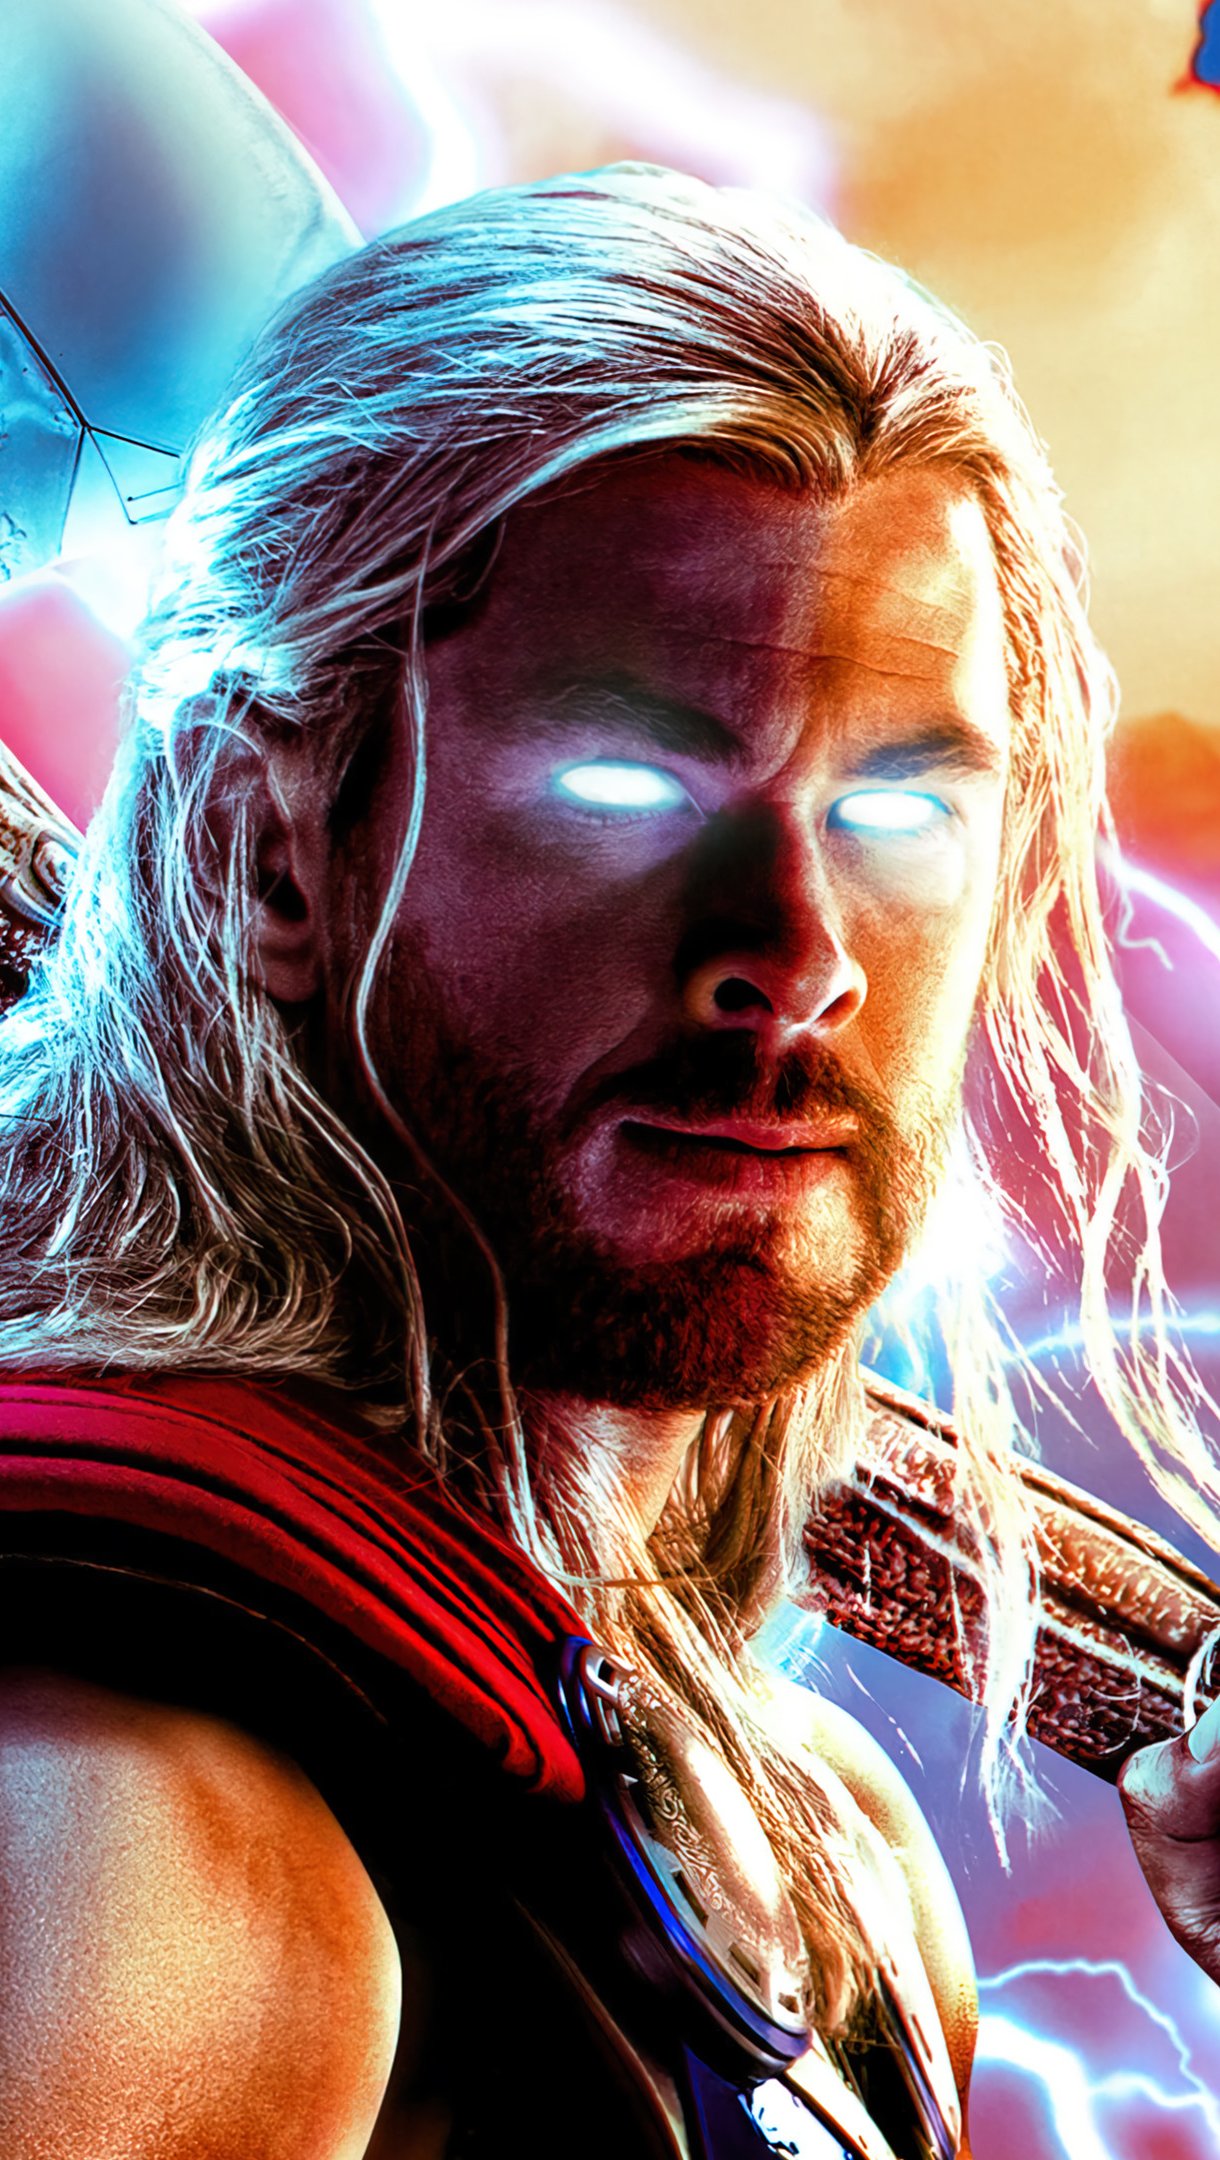 Thor with axe and glowing eyes Wallpaper 4k Ultra HD ID:10098